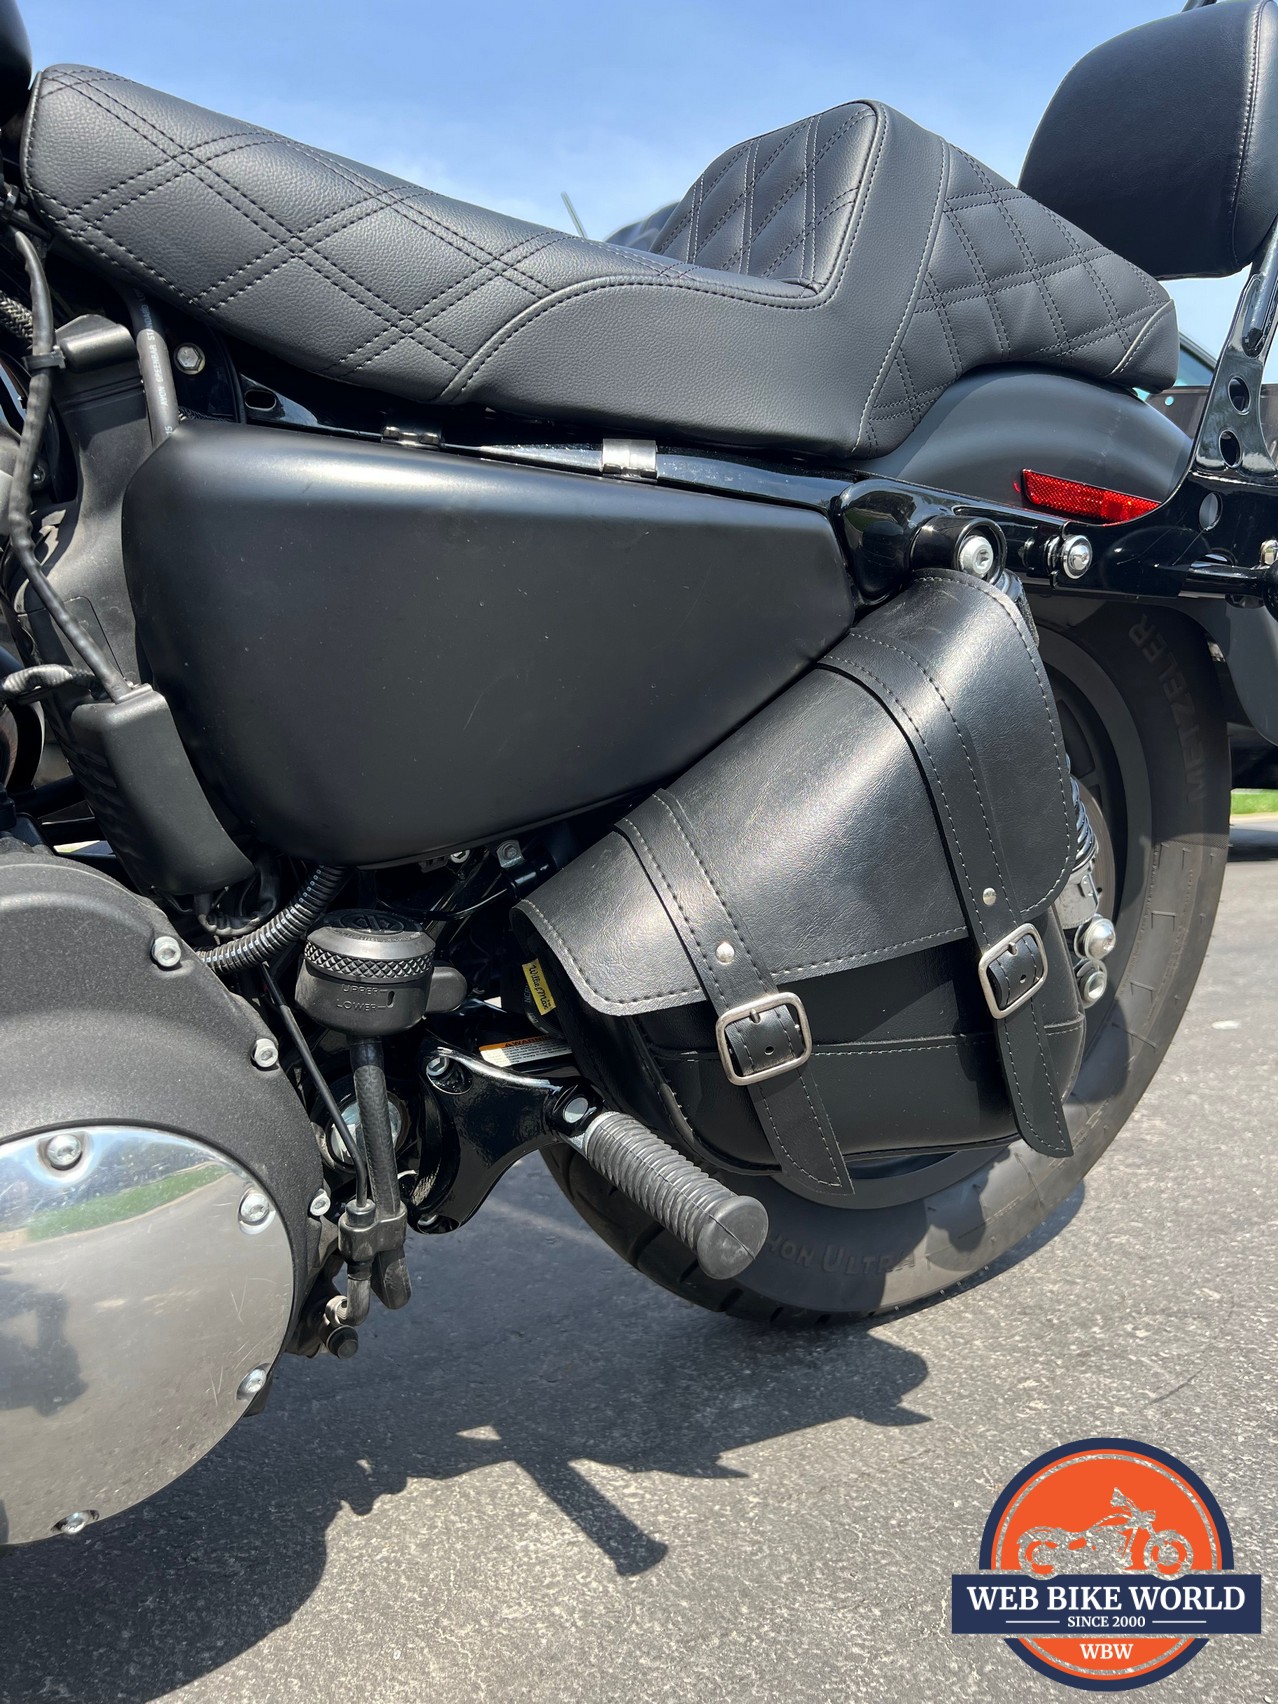 Swingarm bag mounted to the side of a motorcycle near the footpeg